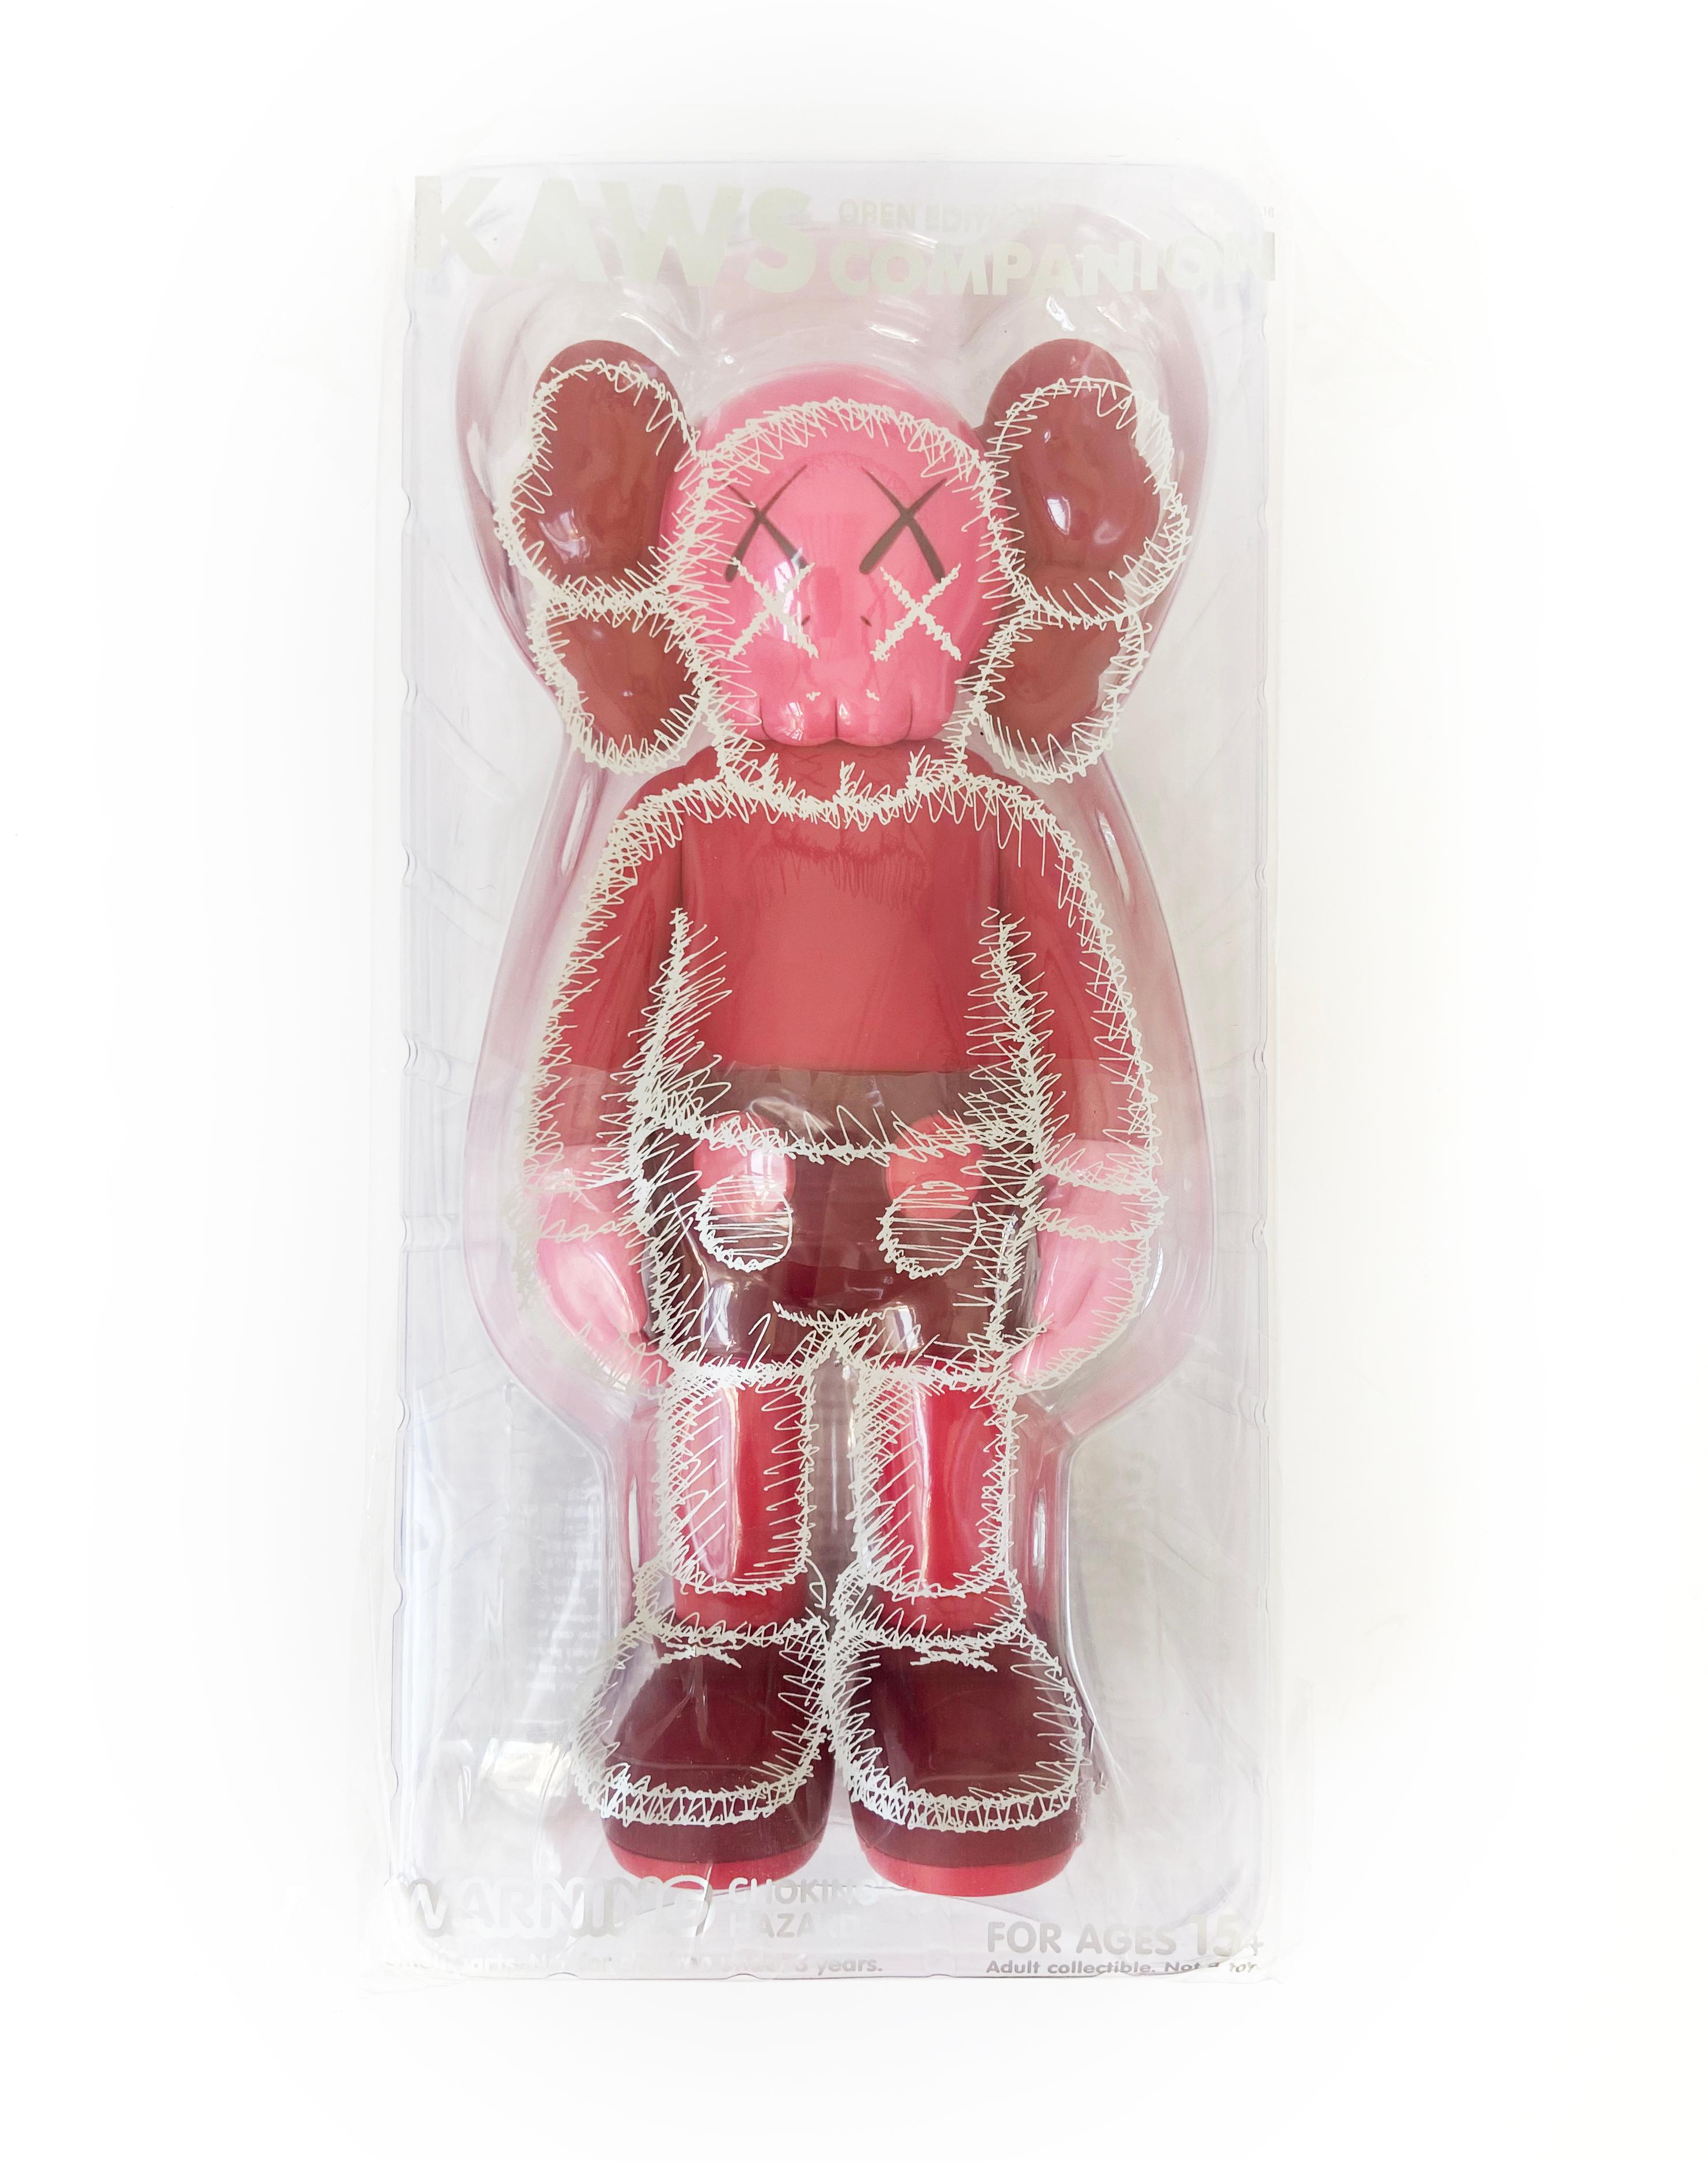 KAWS Red Blush Companion. New and sealed in its original packaging. Published by Medicom Japan in conjunction with the exhibition, KAWS: Where The End Starts at the Modern Art Museum of Fort Worth. ThIs figurine has since sold out. 

Medium: Vinyl